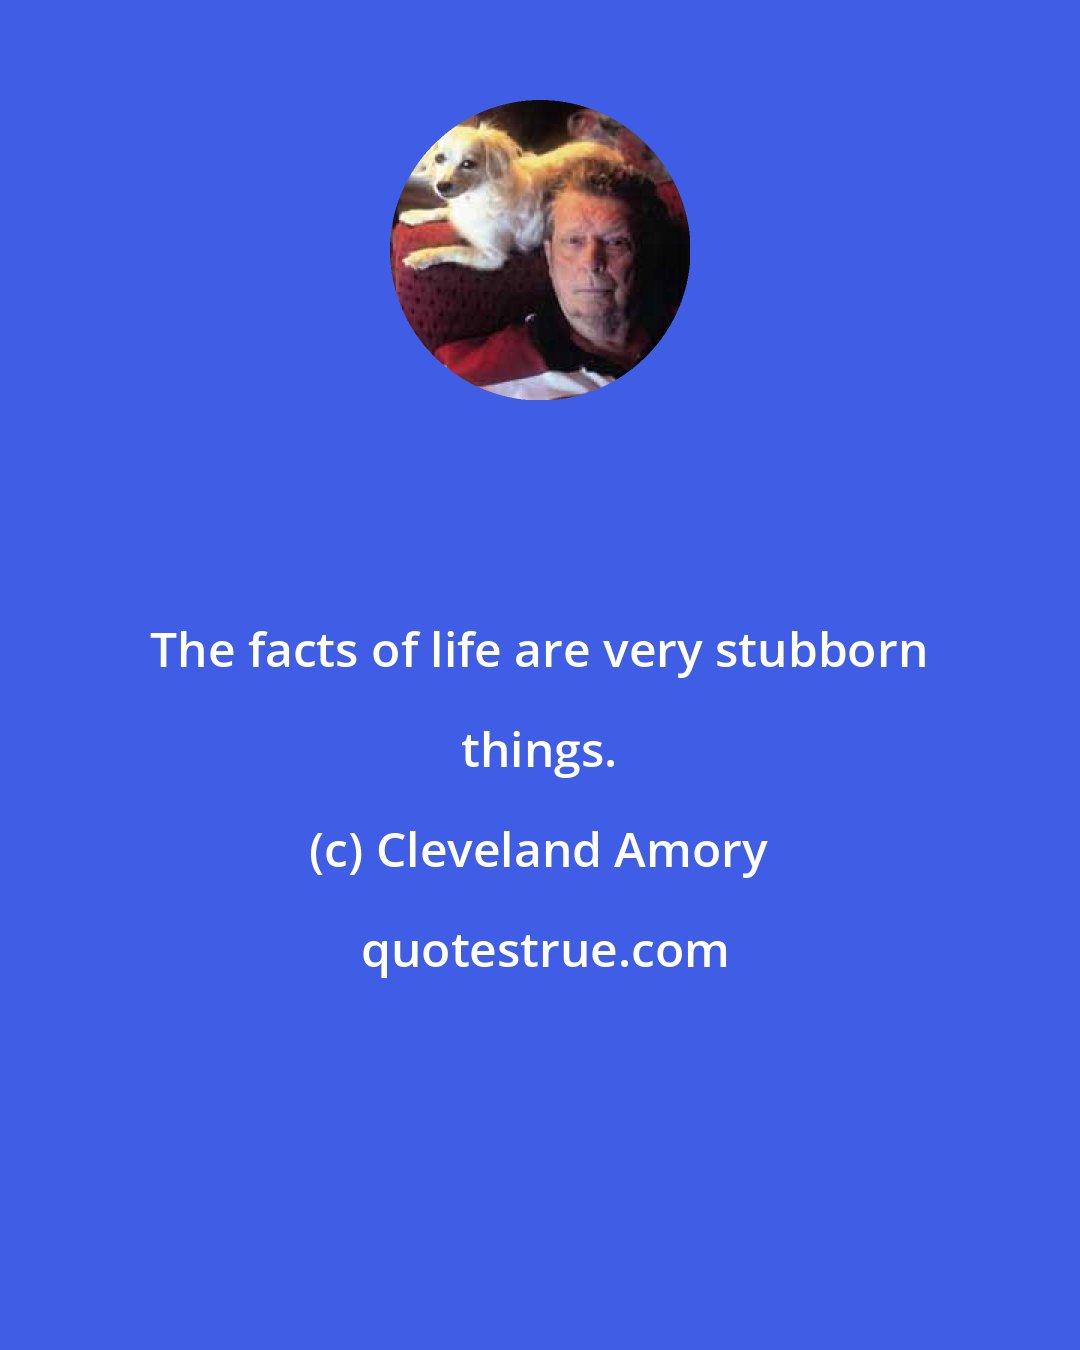 Cleveland Amory: The facts of life are very stubborn things.